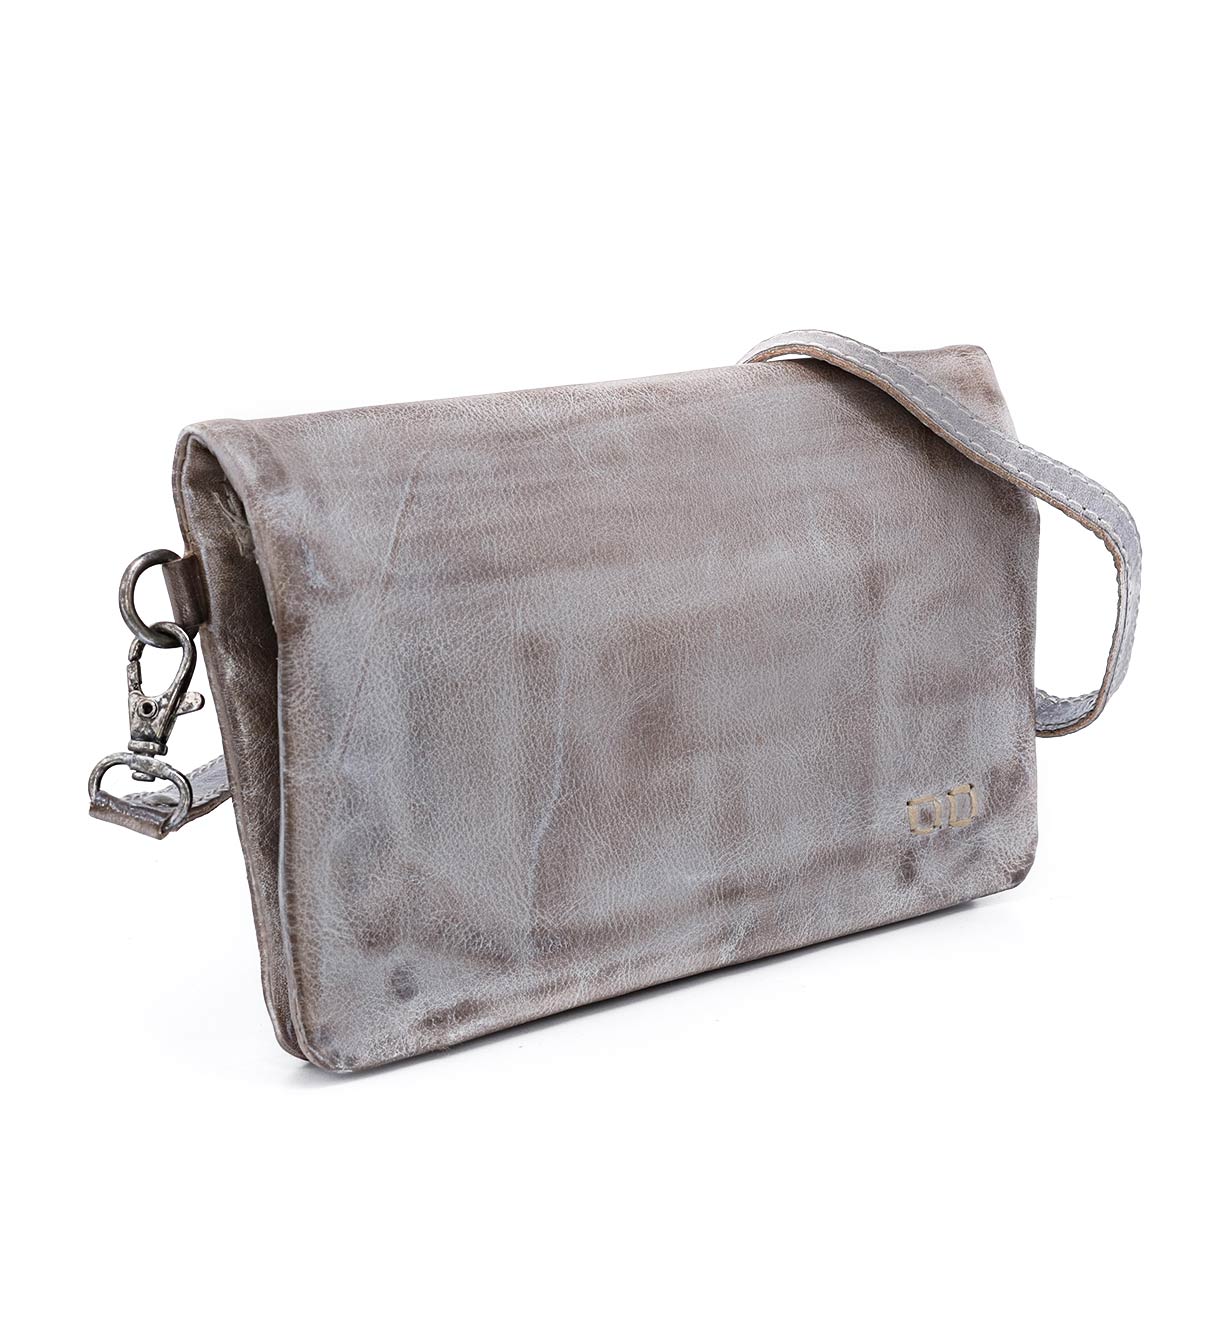 A grey leather Bed Stu Cadence crossbody bag with a strap.